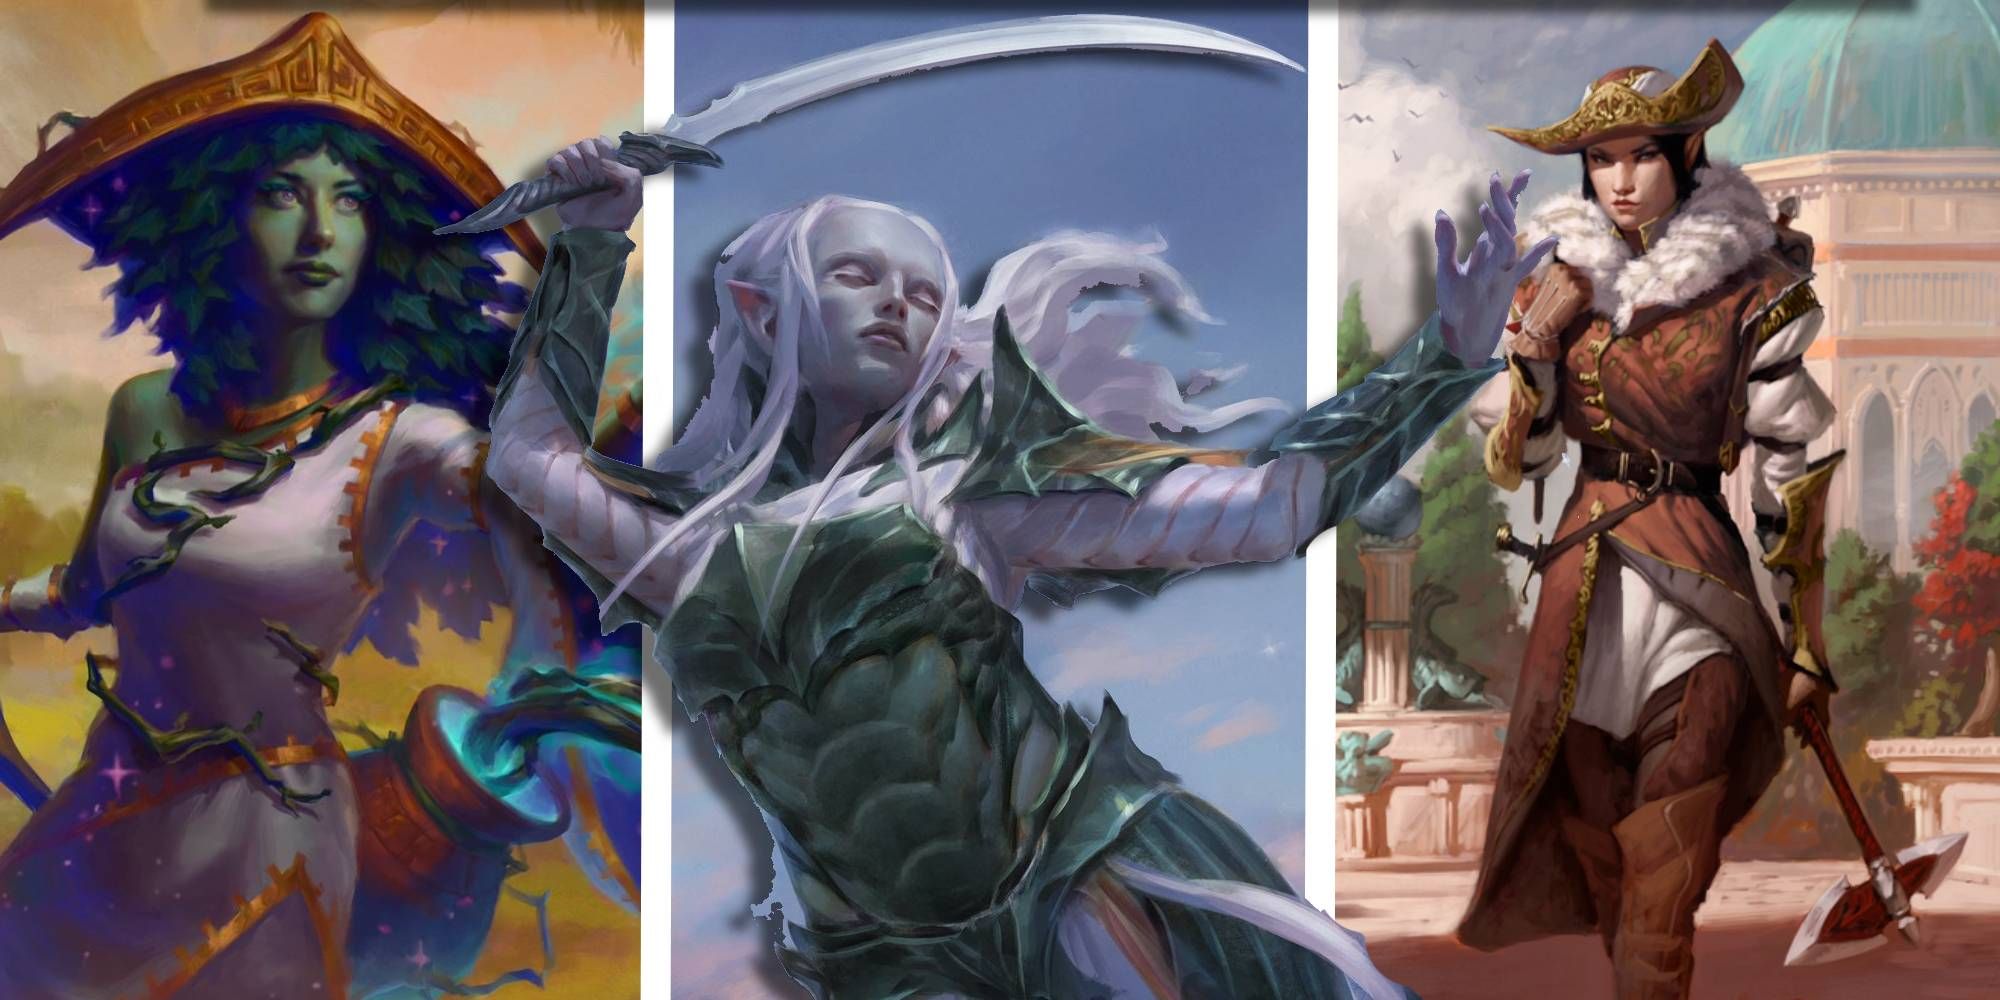 Magic The Gathering Best Selesnya Commanders Sythis, Trelasarra, and Selvala